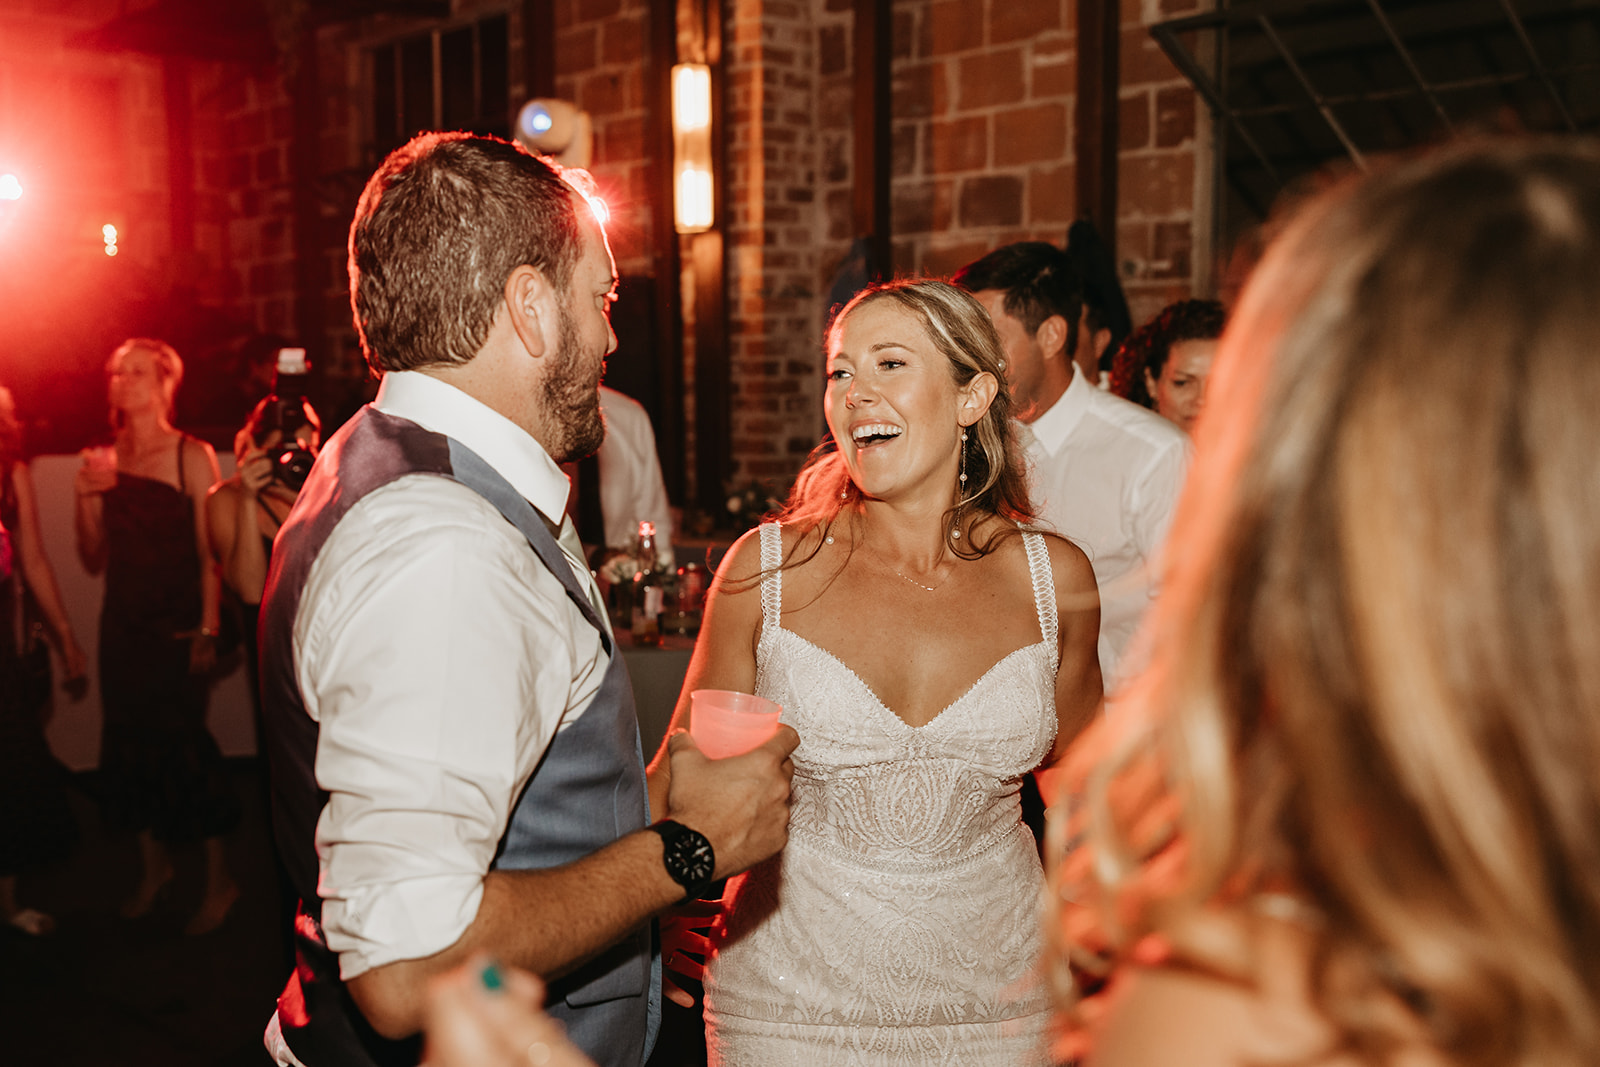 bride and groom dancing on the dance floor | The Penny: A Downtown Wedding Venue in San Luis Obispo